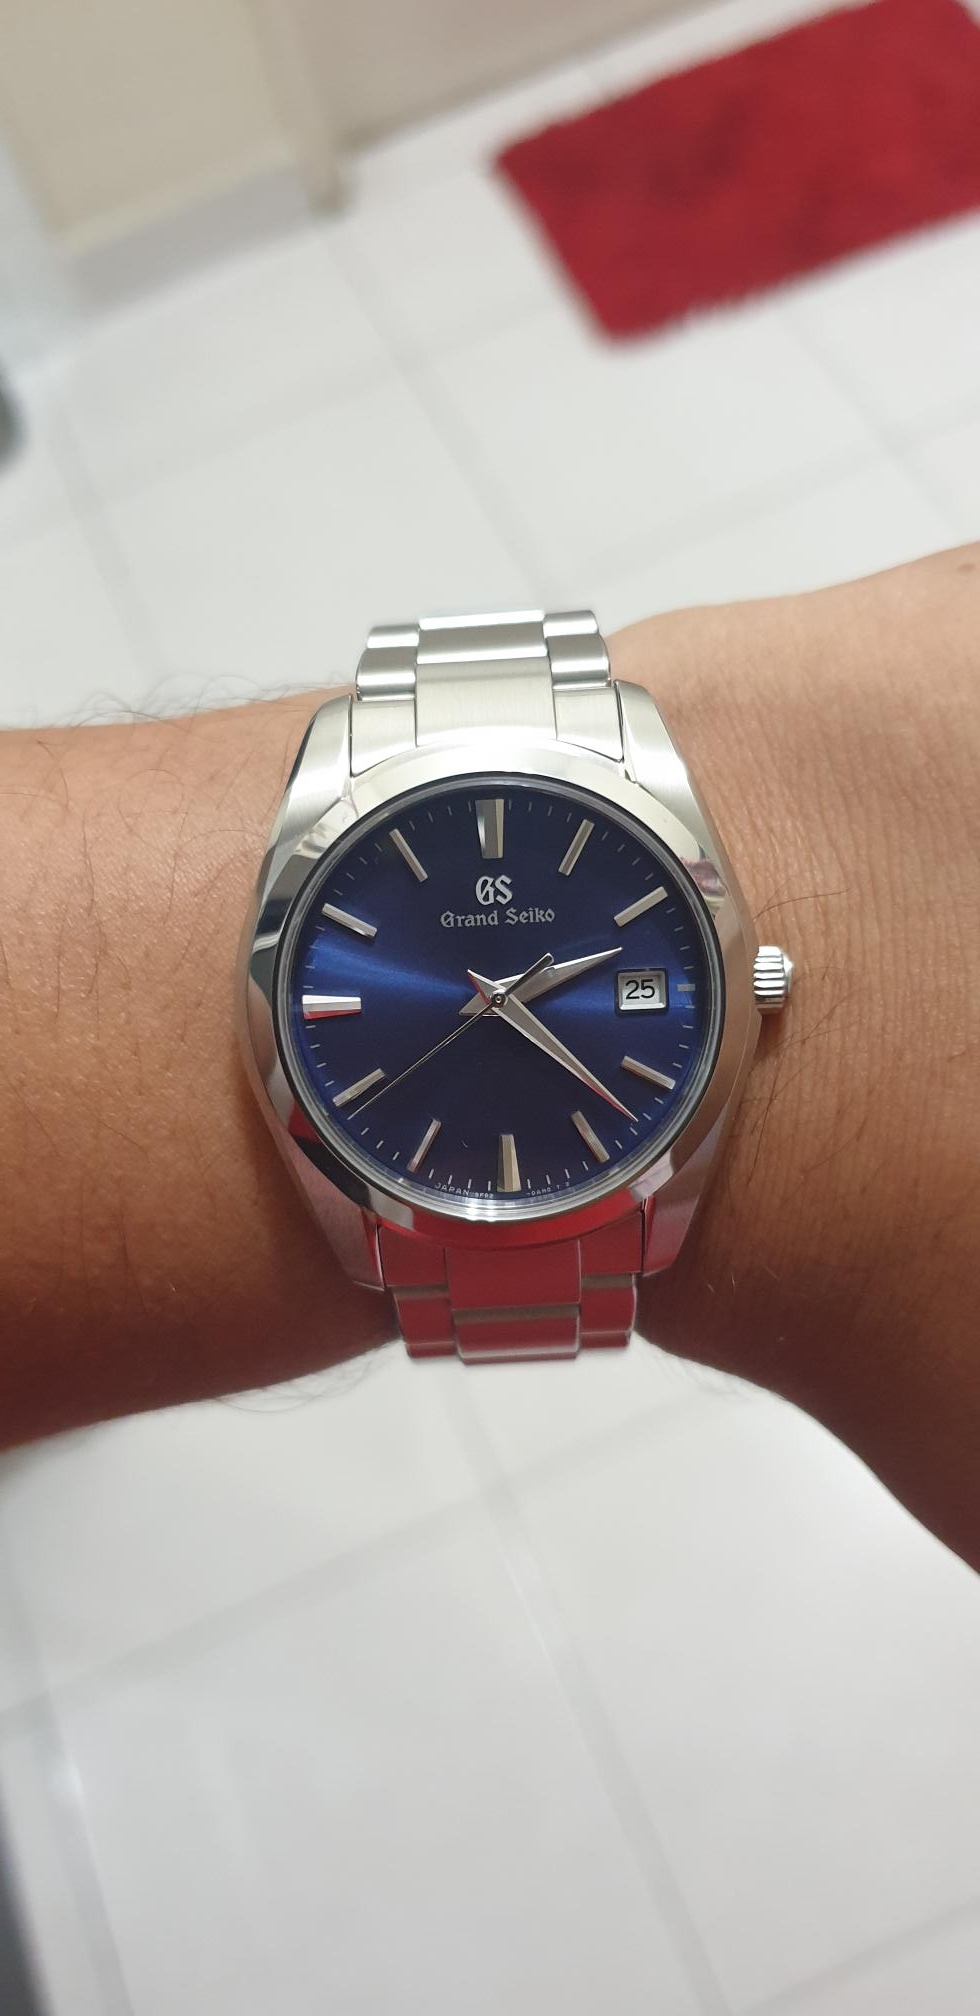 Owner Review: Grand Seiko SBGX265 - FIFTH WRIST